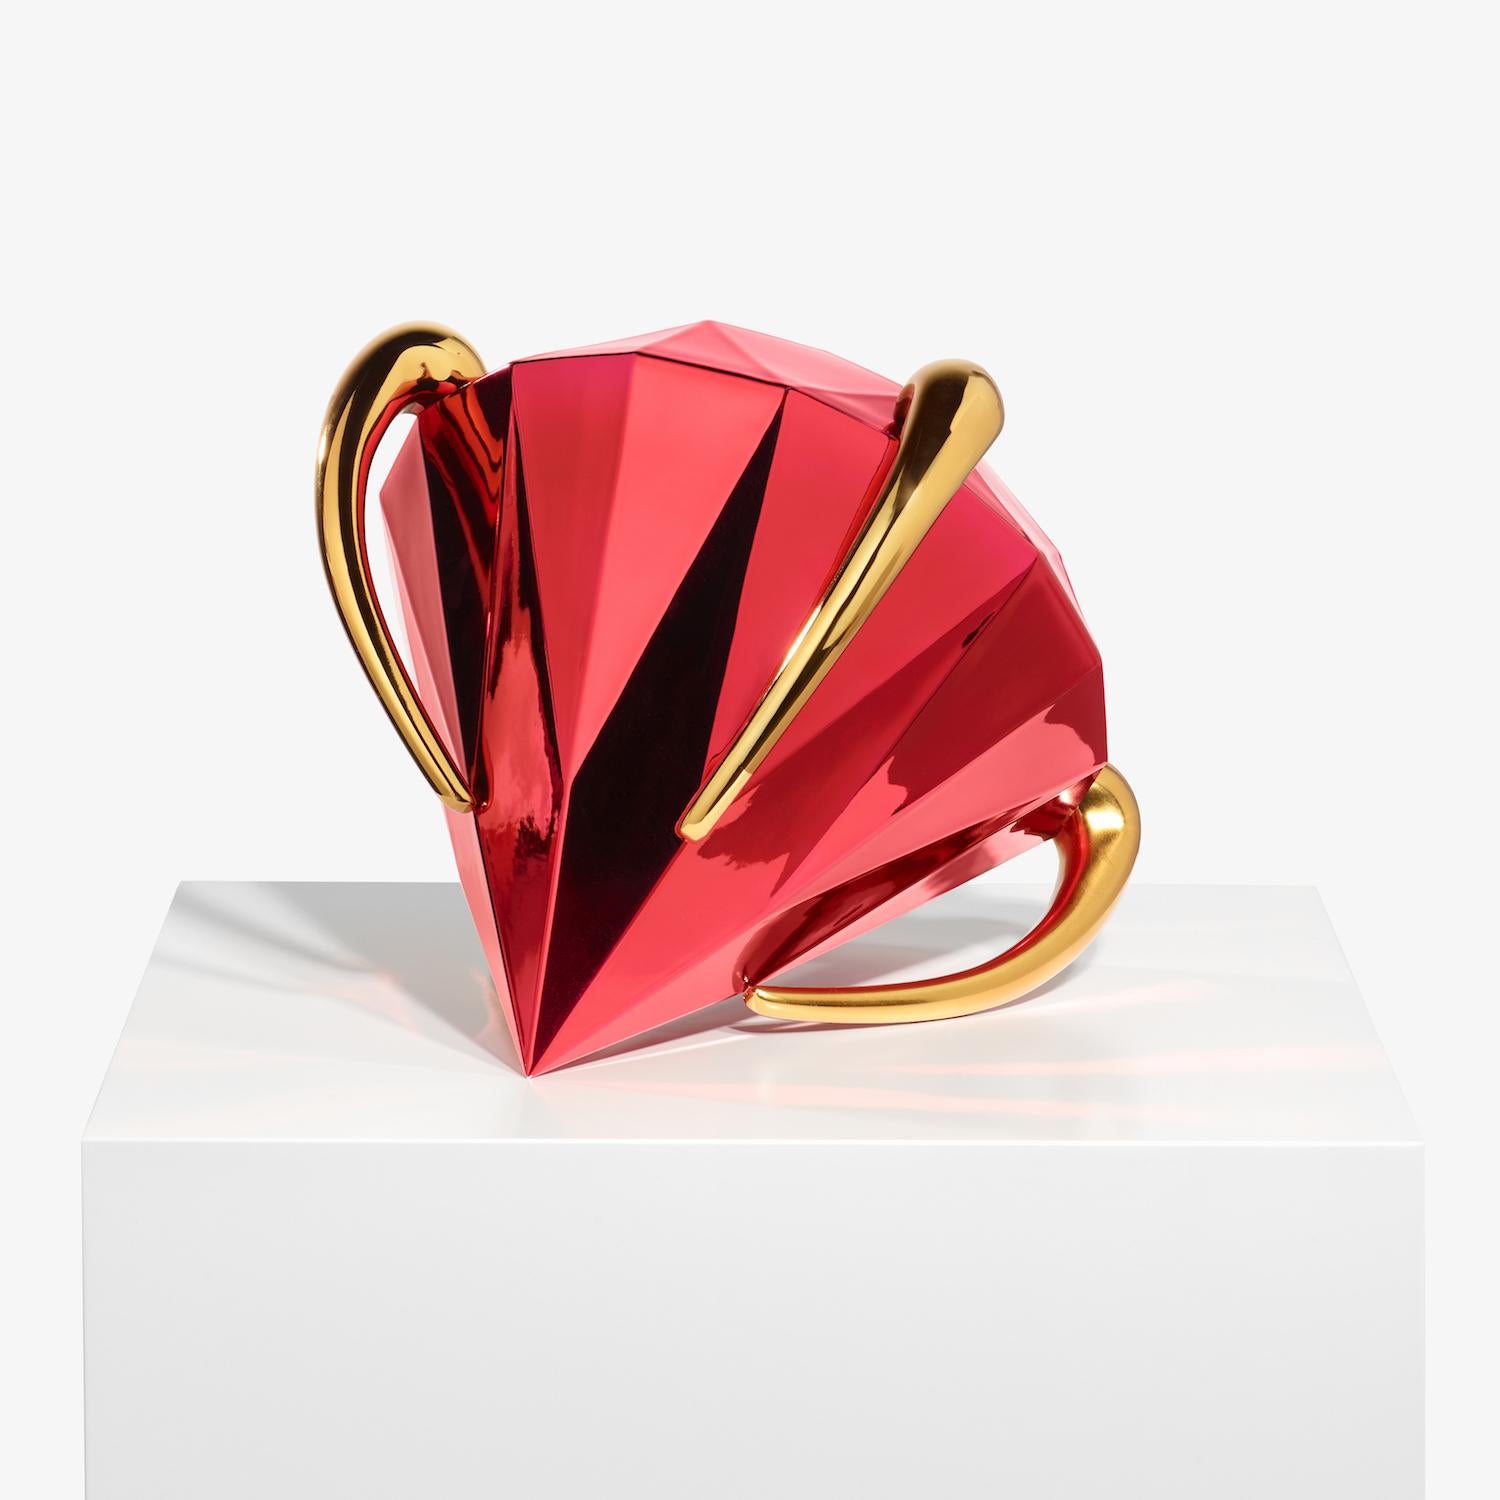 Red Diamond Sculpture by Jeff Koons, Porcelaine, Objects for Objects, Contemporary Art en vente 2